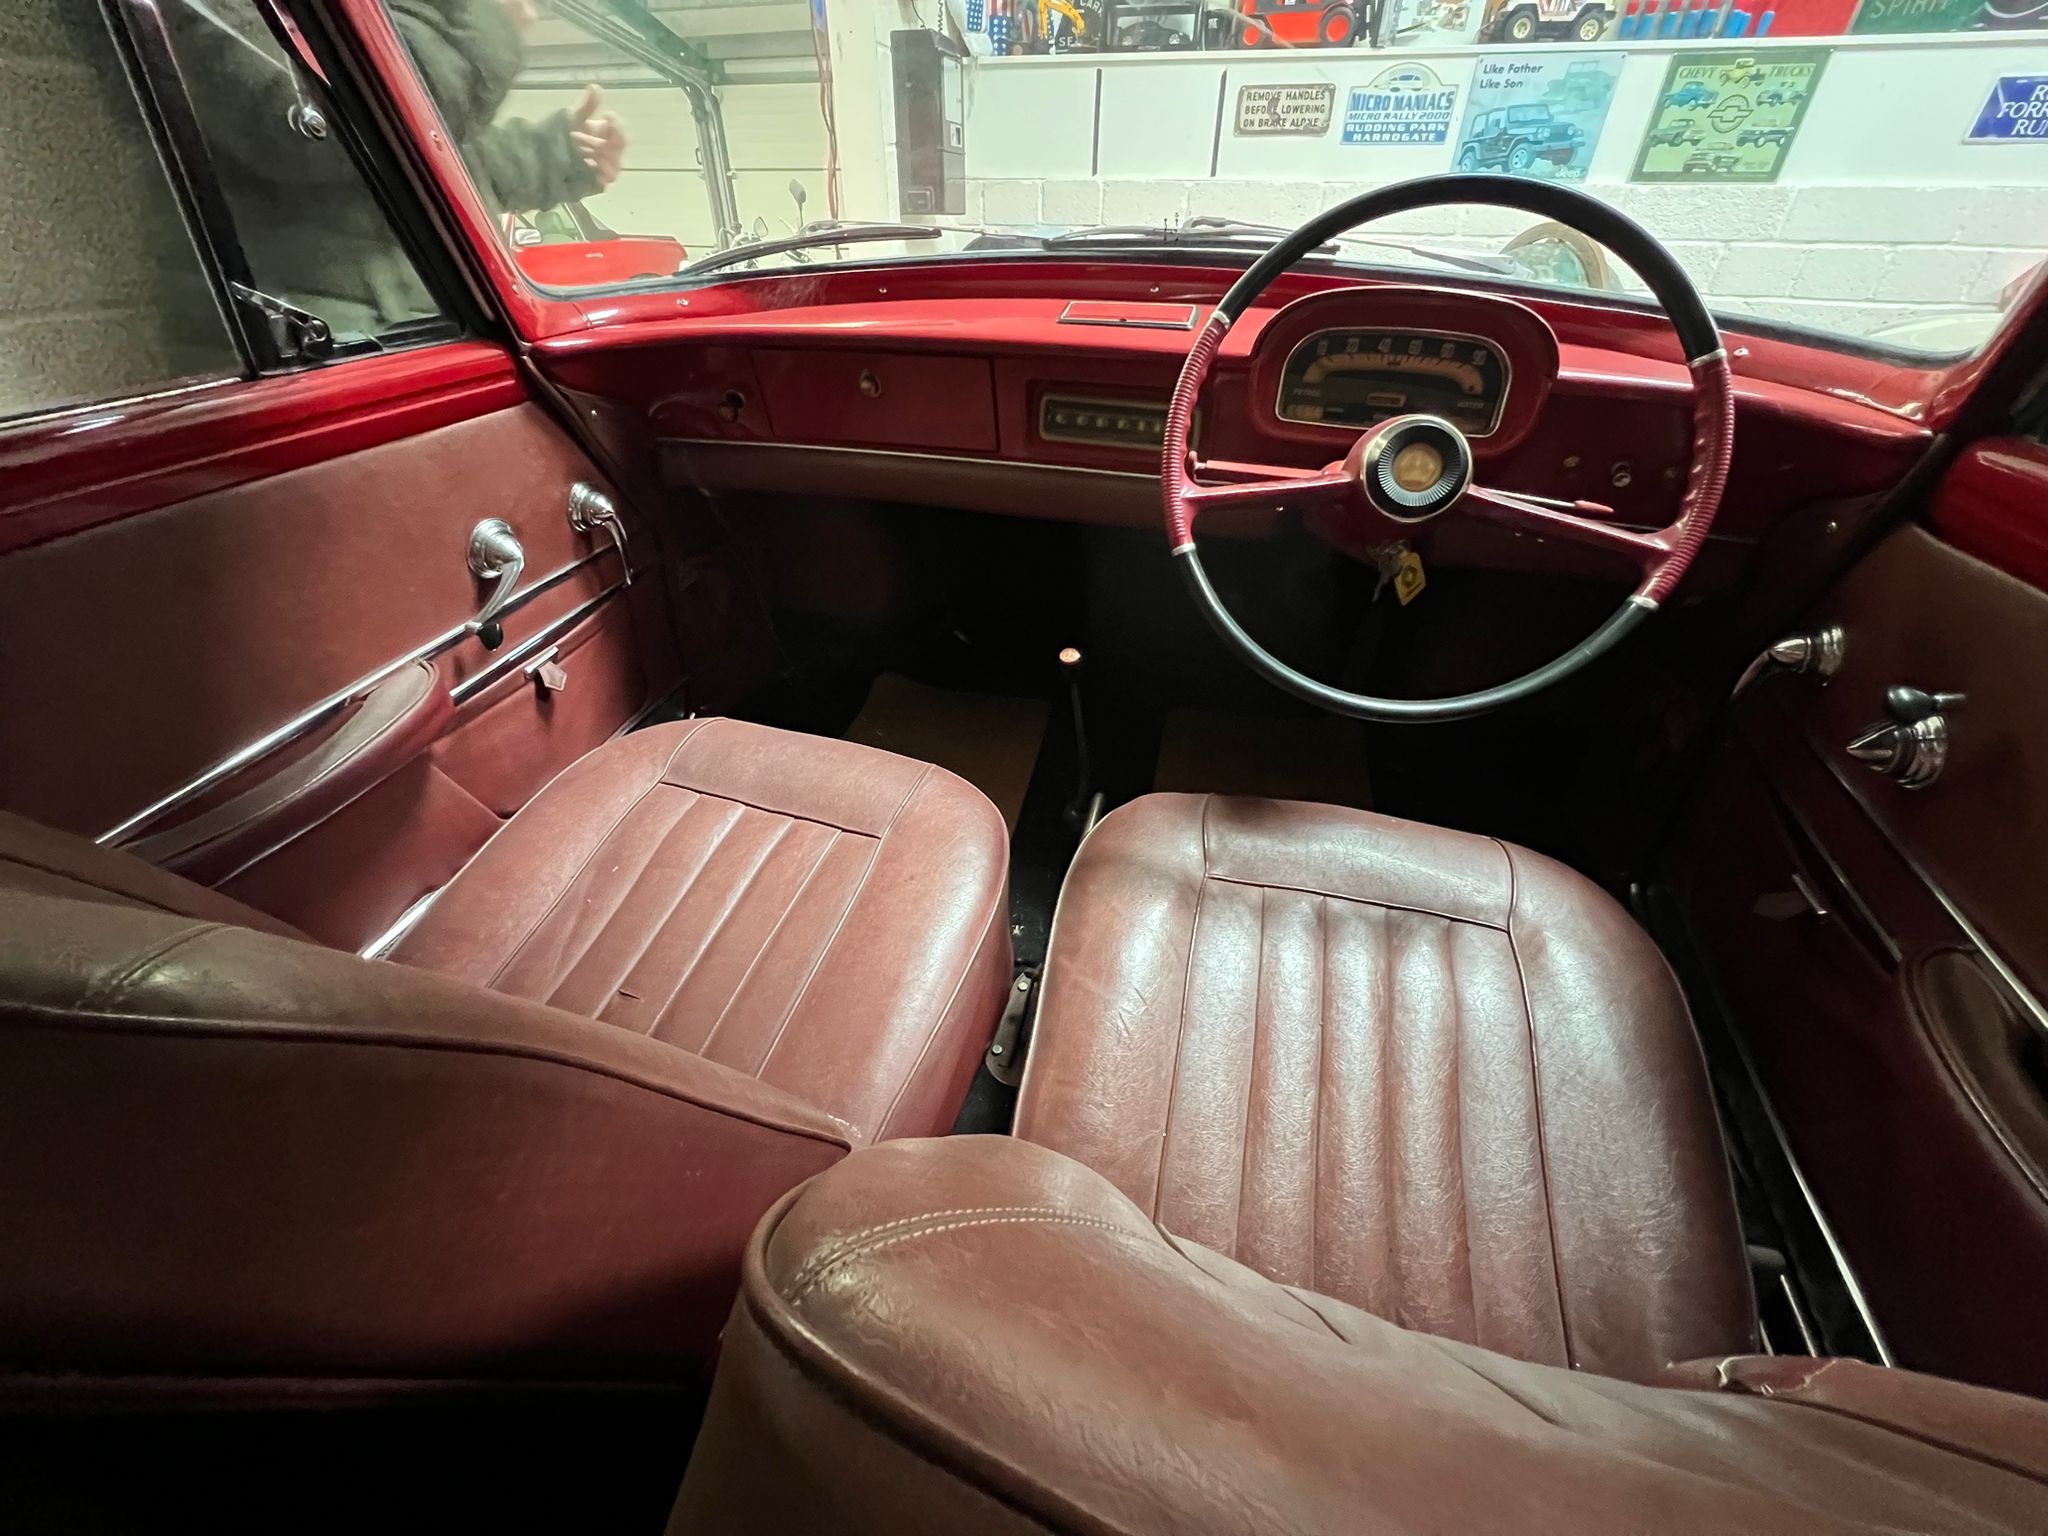 Renault Floride Coupe 1962 - Image 3 of 18